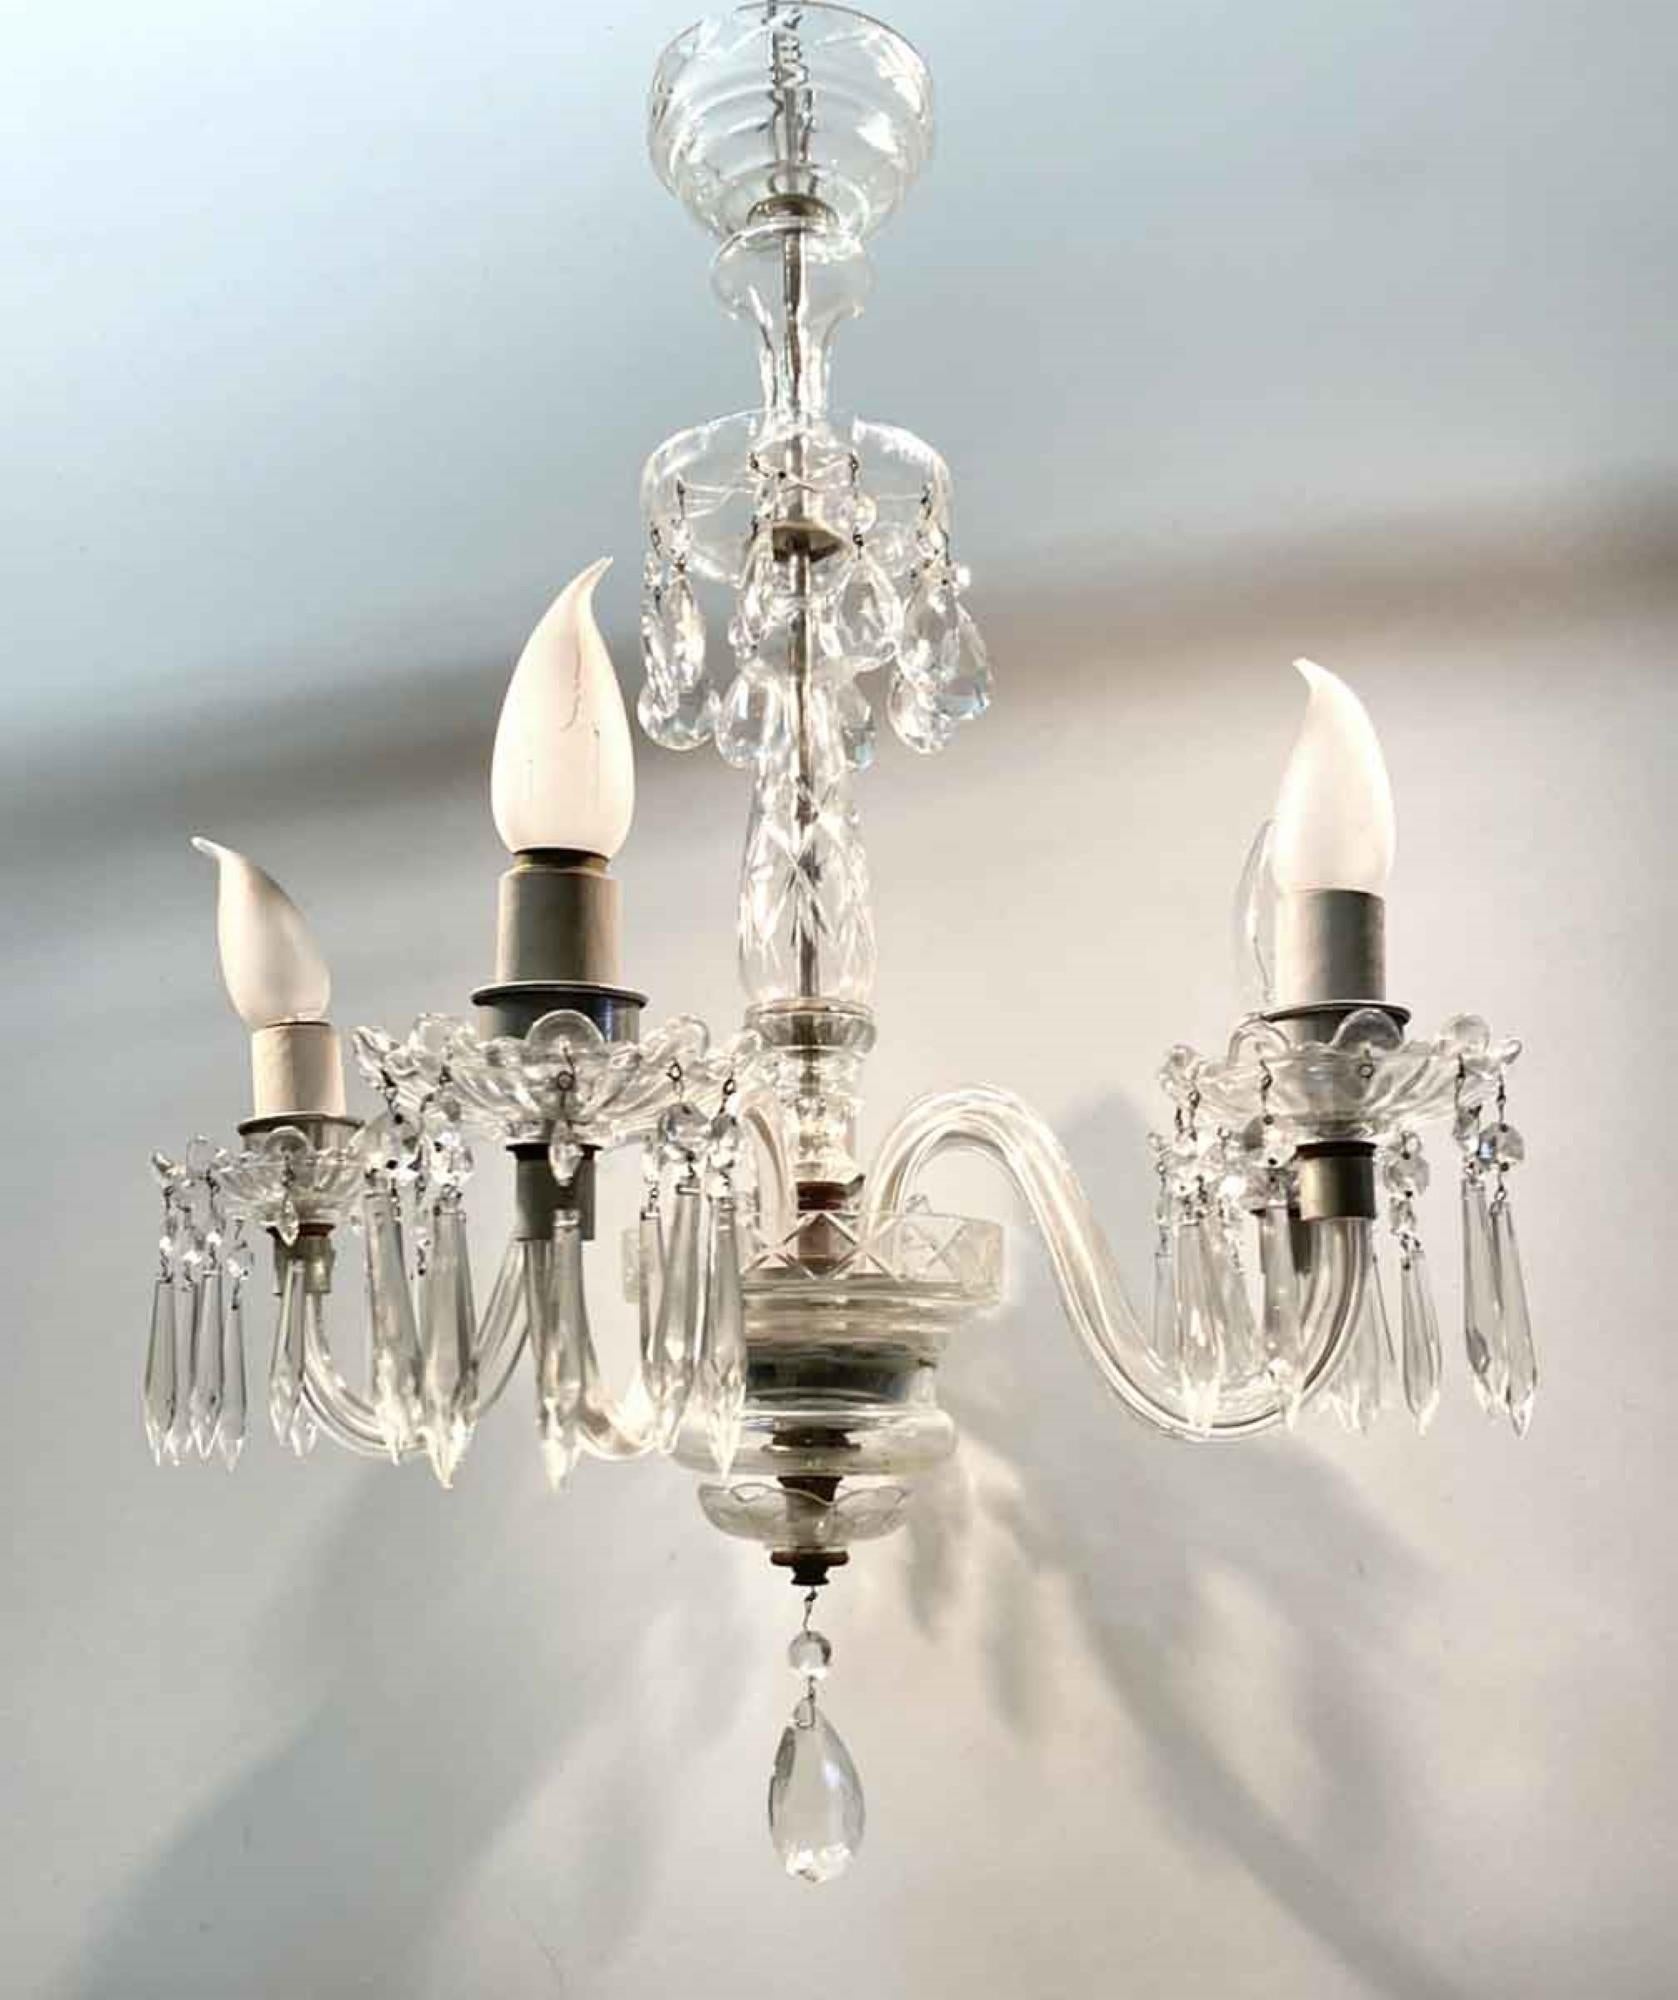 1920s antique Victorian style 5-arm crystal chandelier with glass arms and a simple design. Price includes restoration. This can be seen at our 400 Gilligan St location in Scranton. PA.